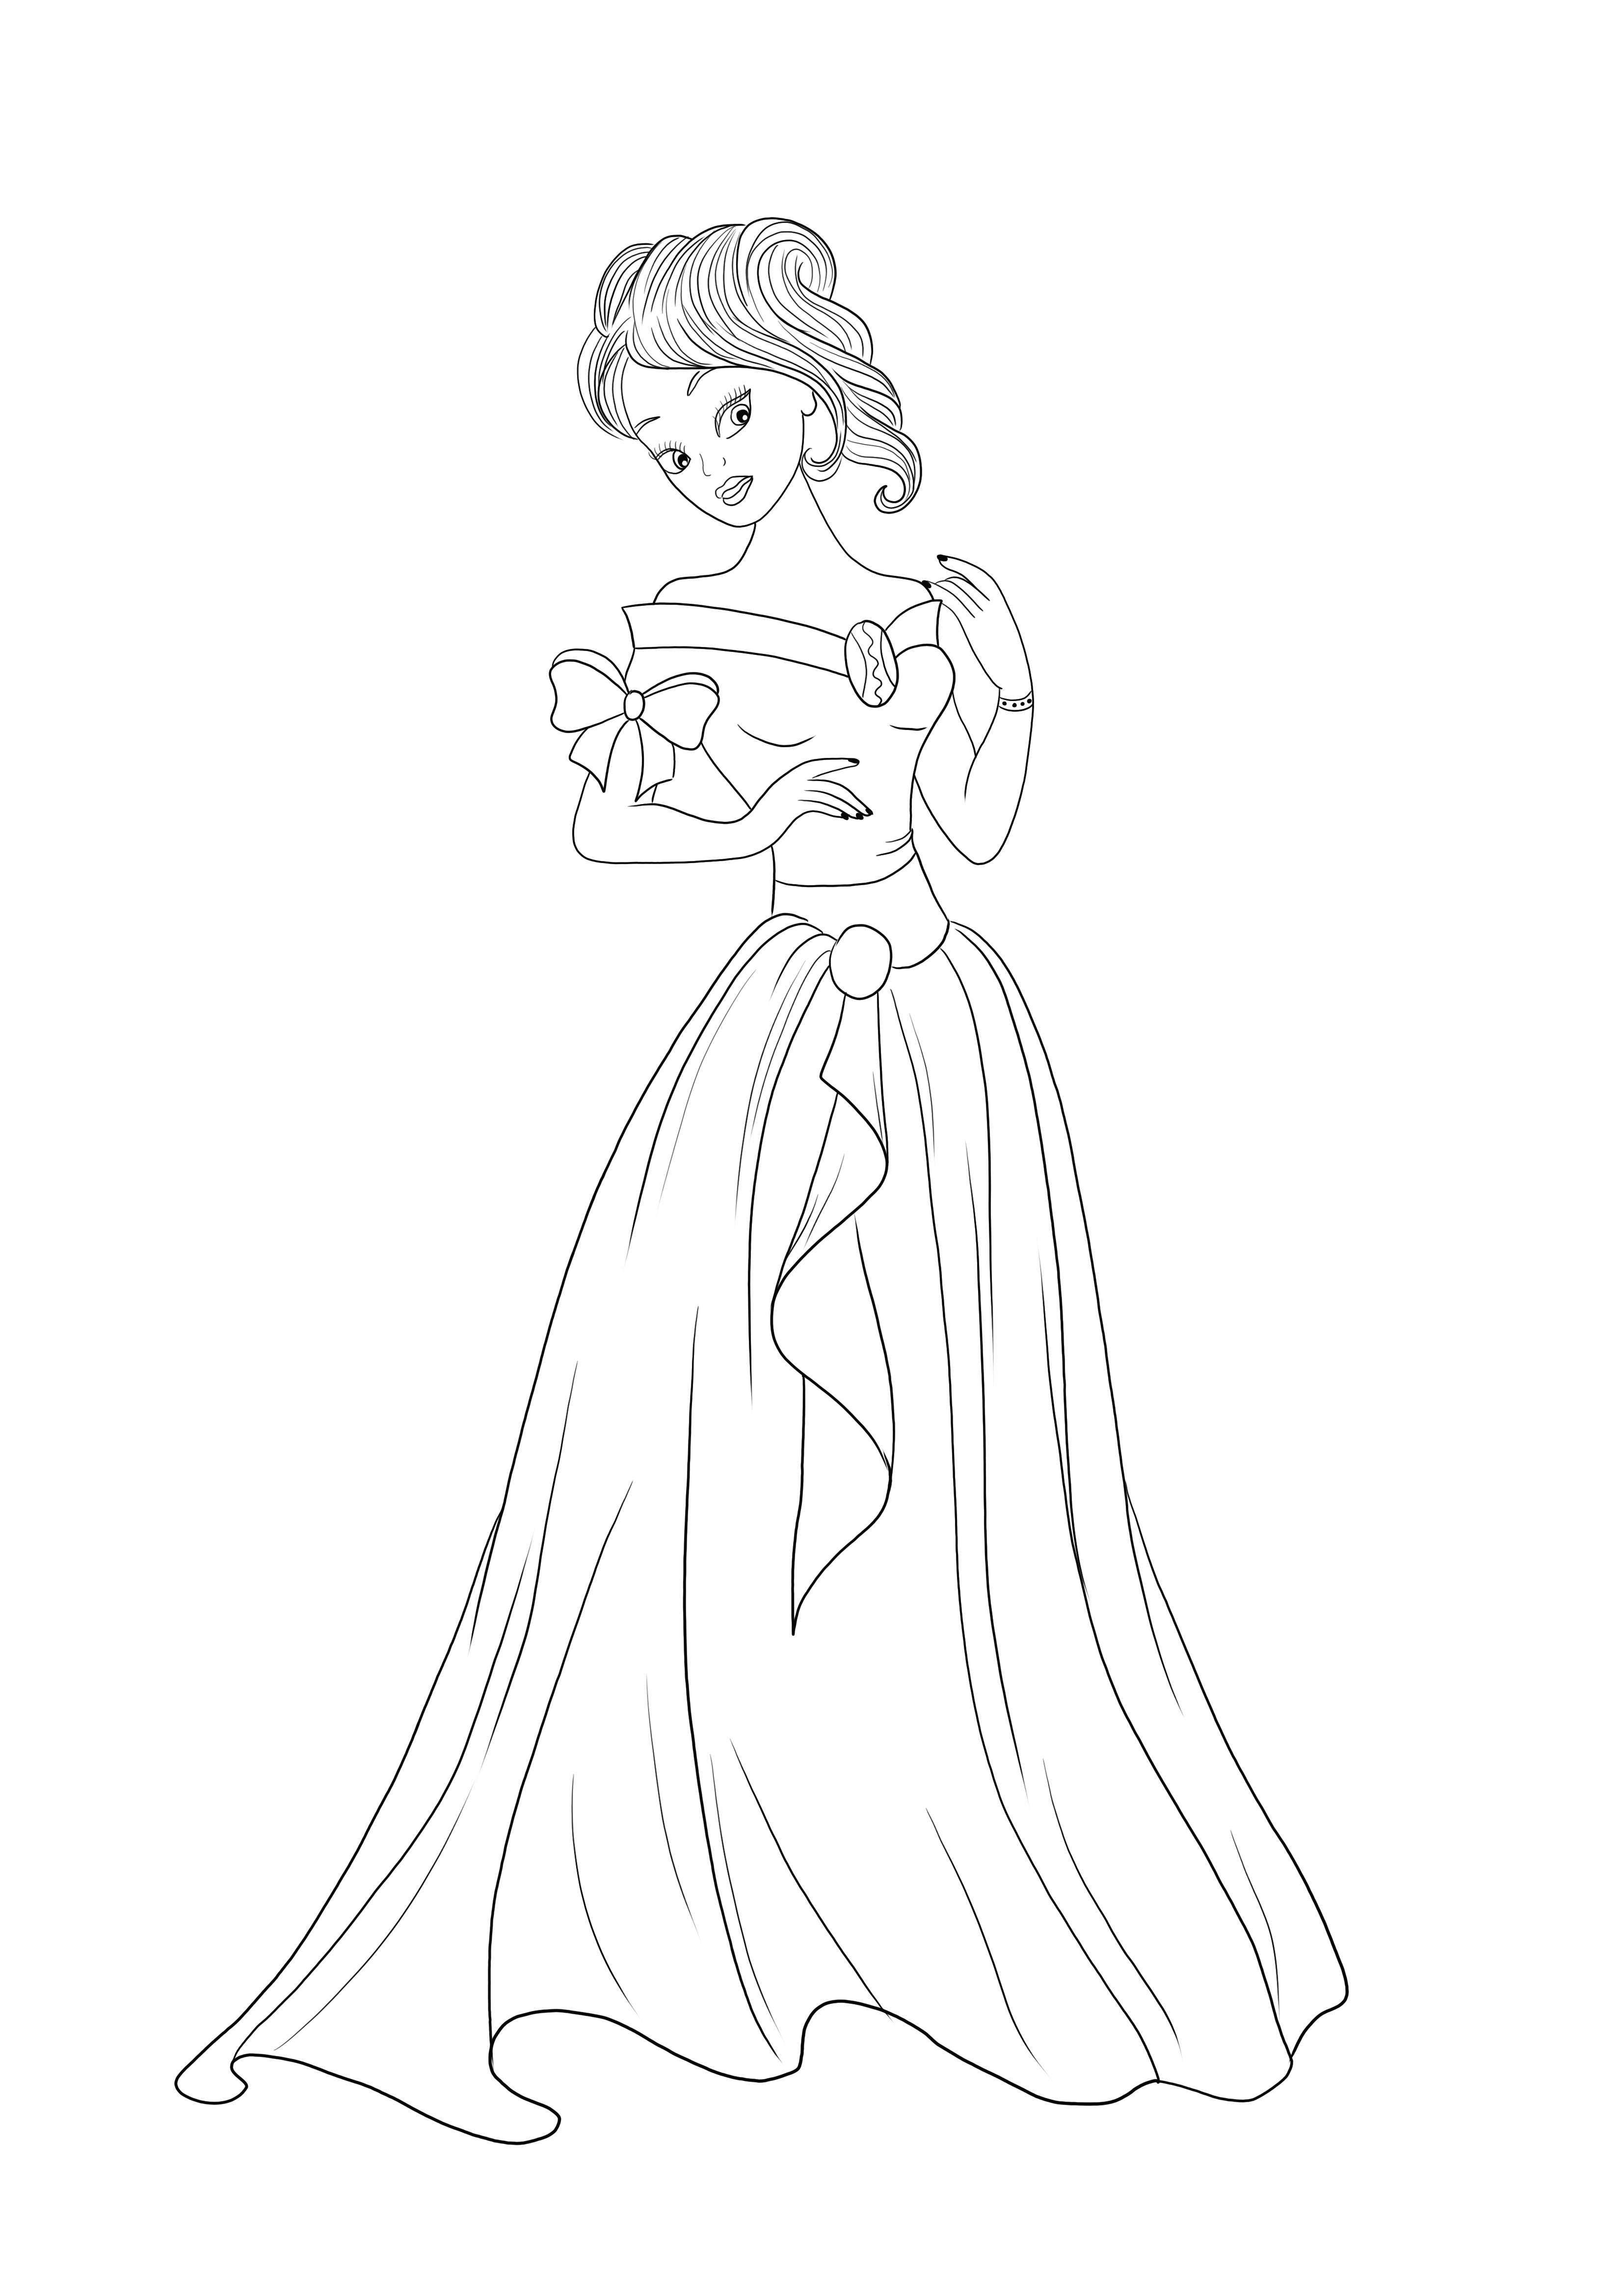 Our Beautiful Princess coloring sheet is ready to be printed for free and colored